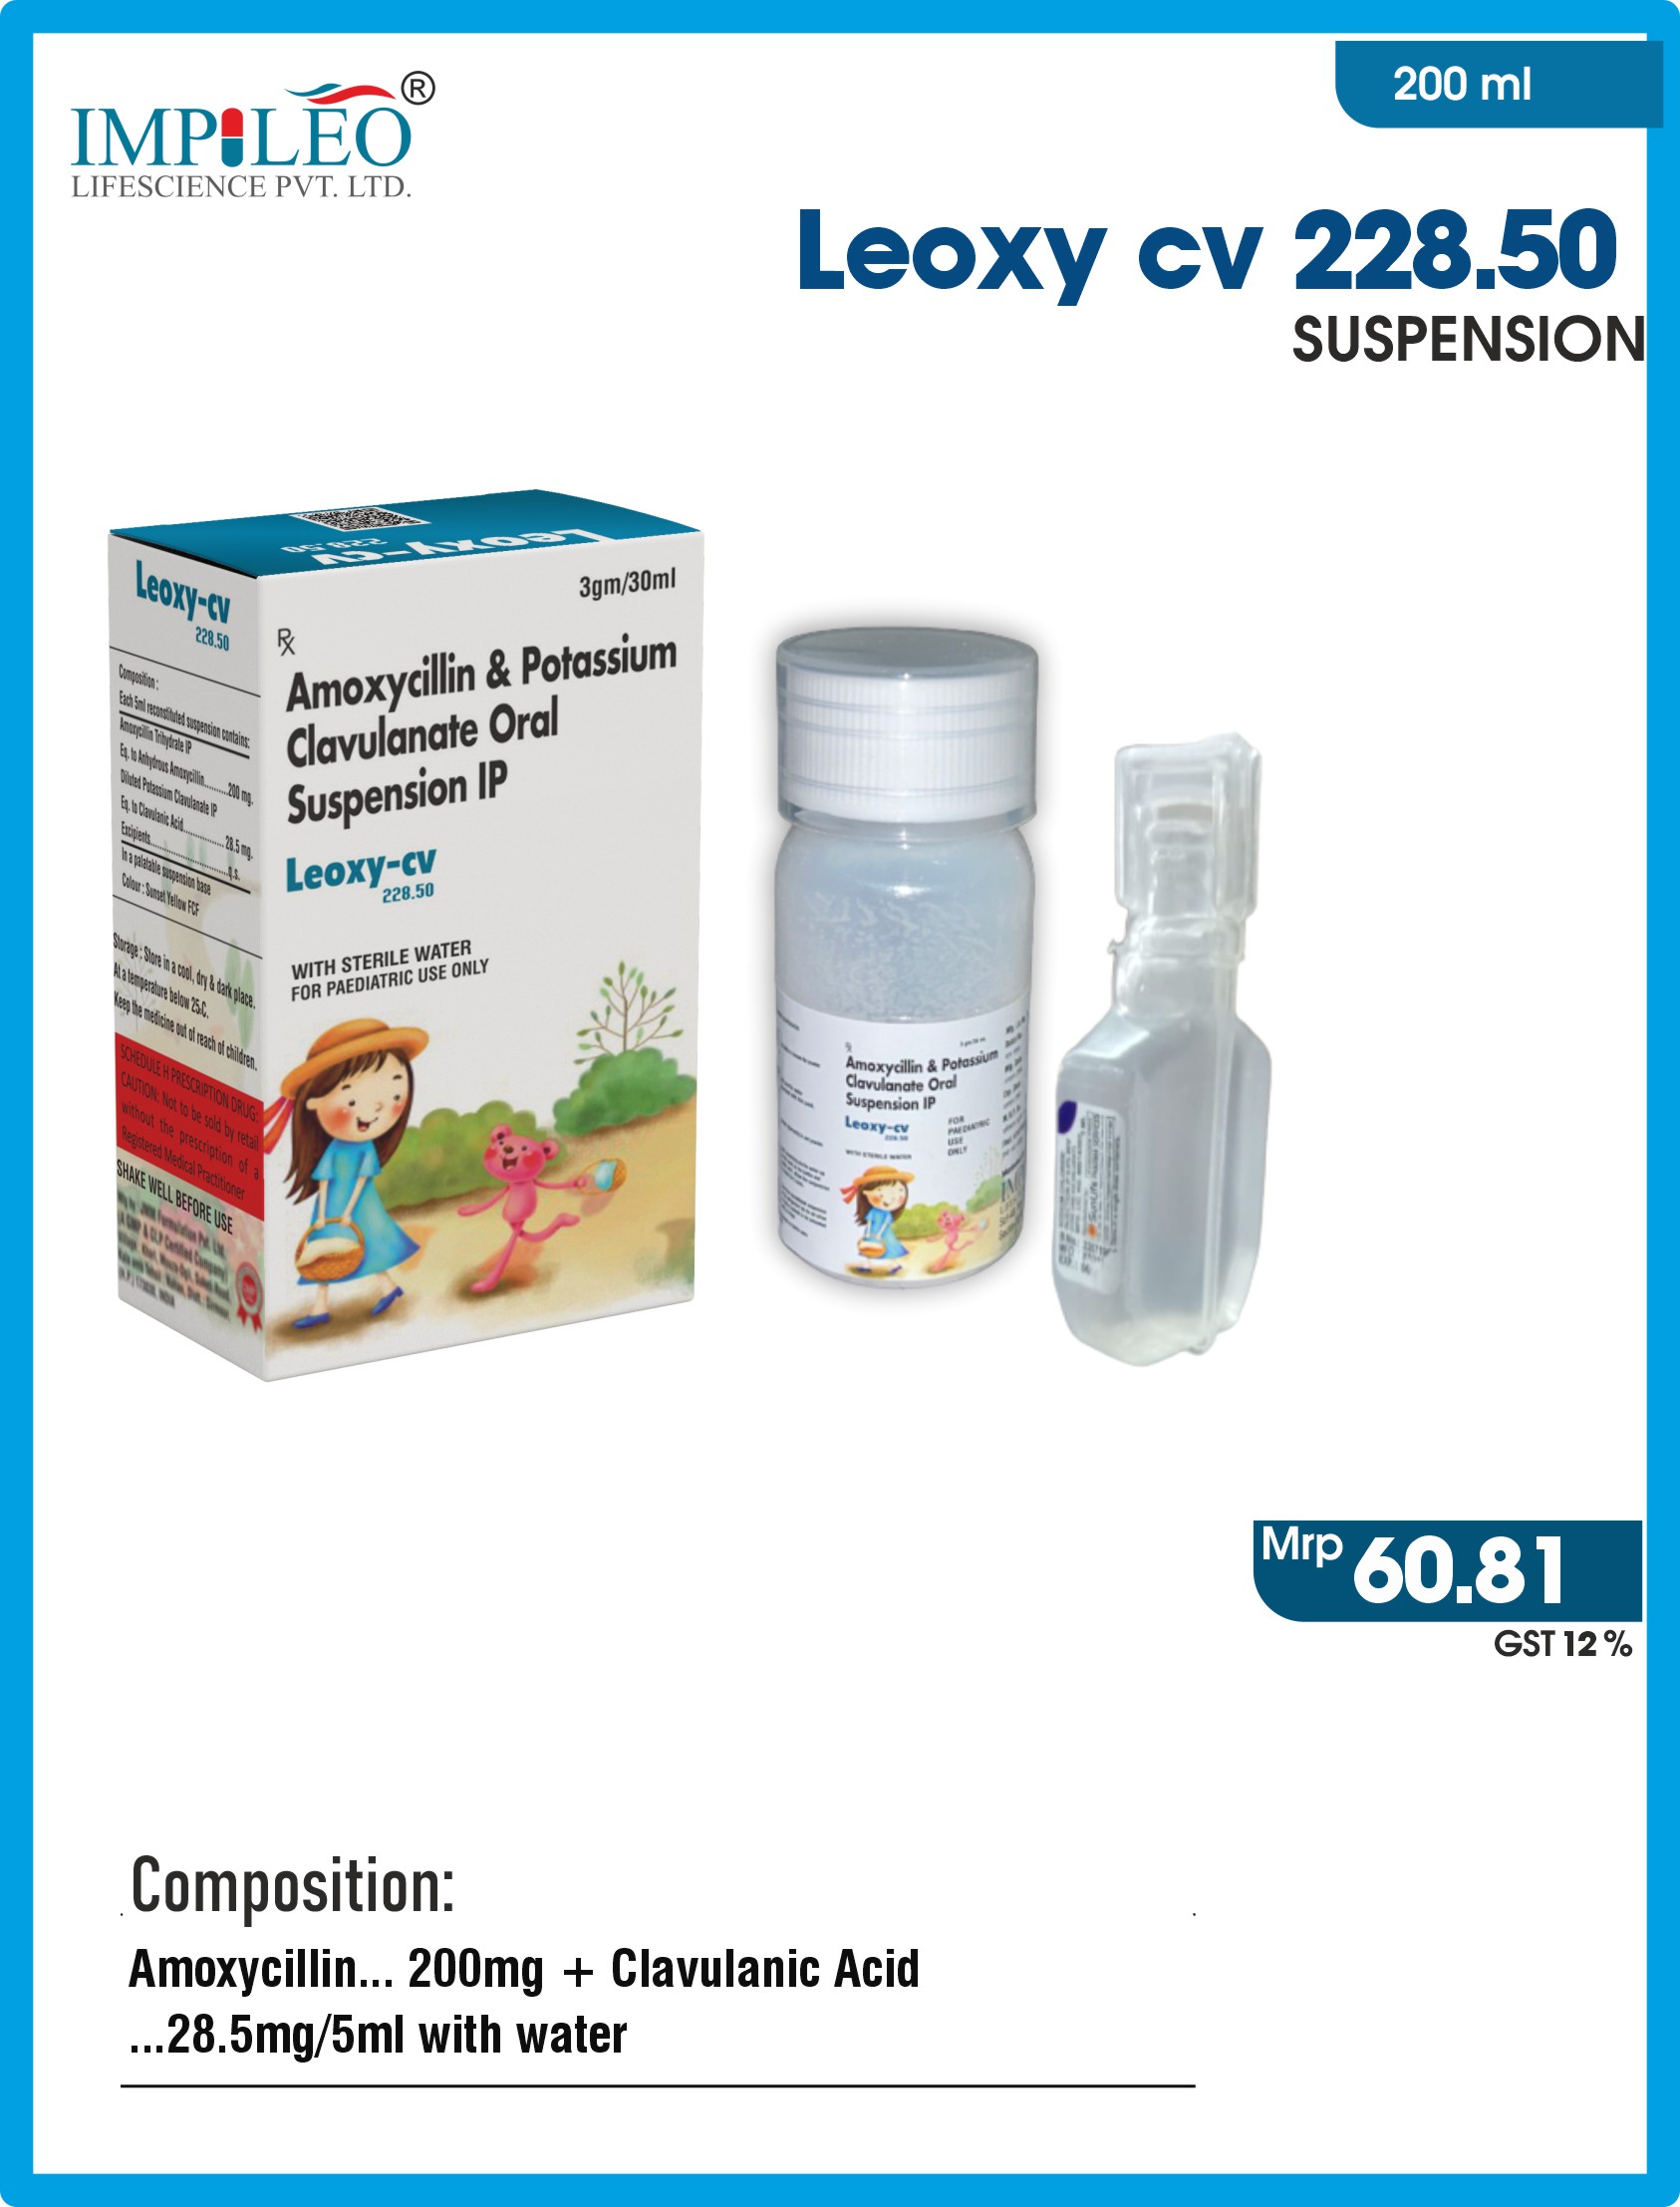 Get Ahead with PCD Pharma Franchise in Panchkula : LEOXY CV 228.50 Dry Syrup